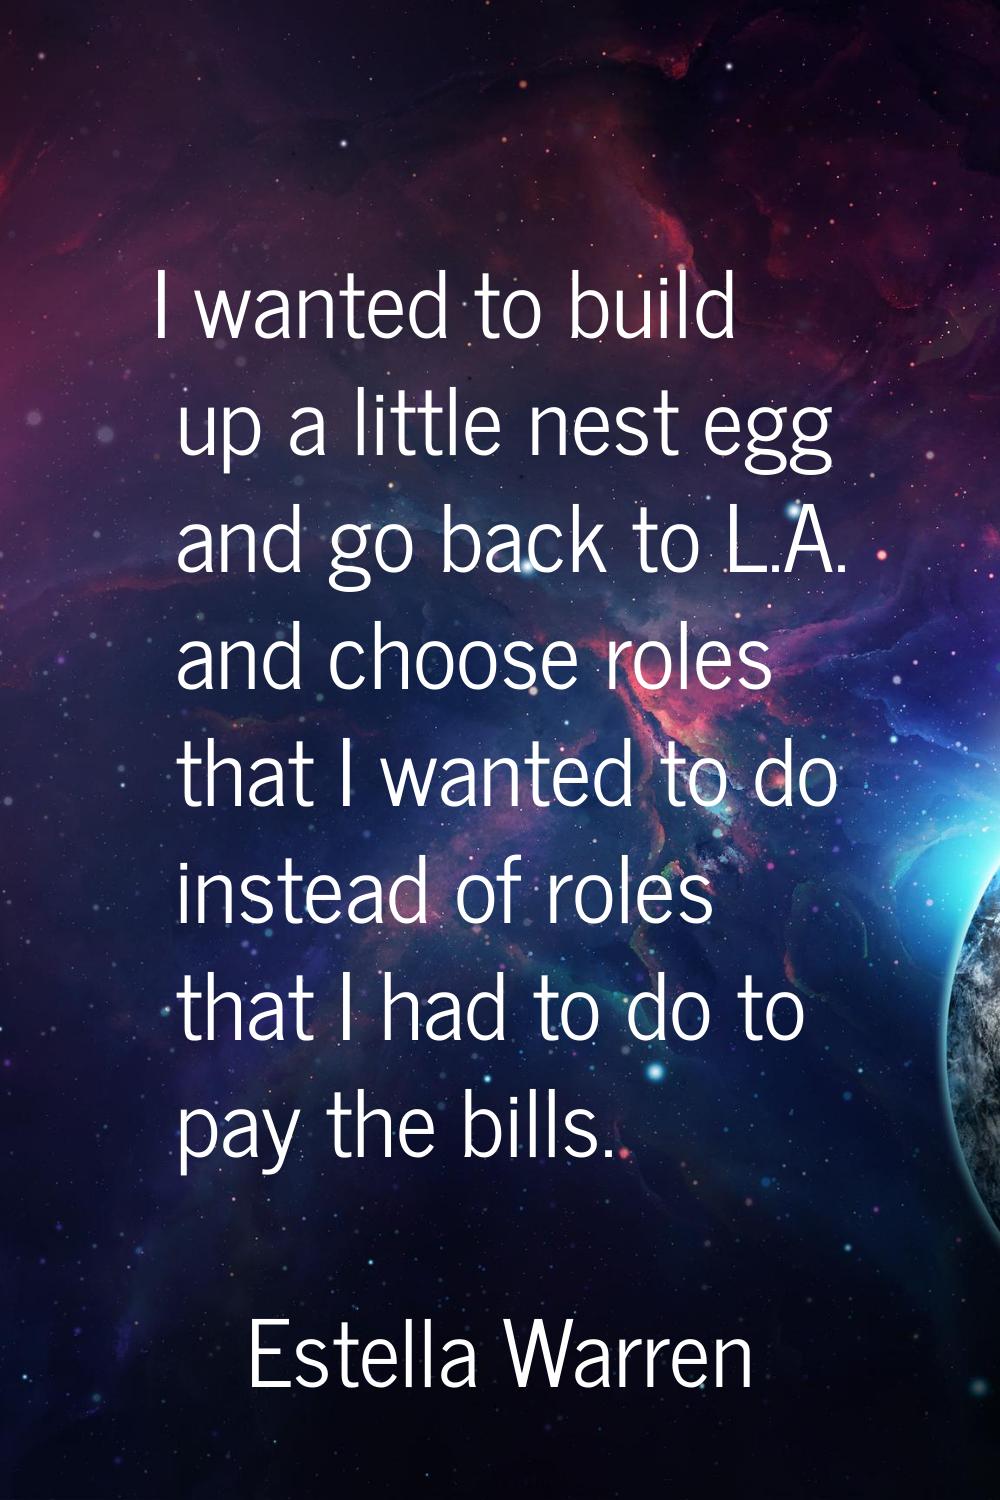 I wanted to build up a little nest egg and go back to L.A. and choose roles that I wanted to do ins